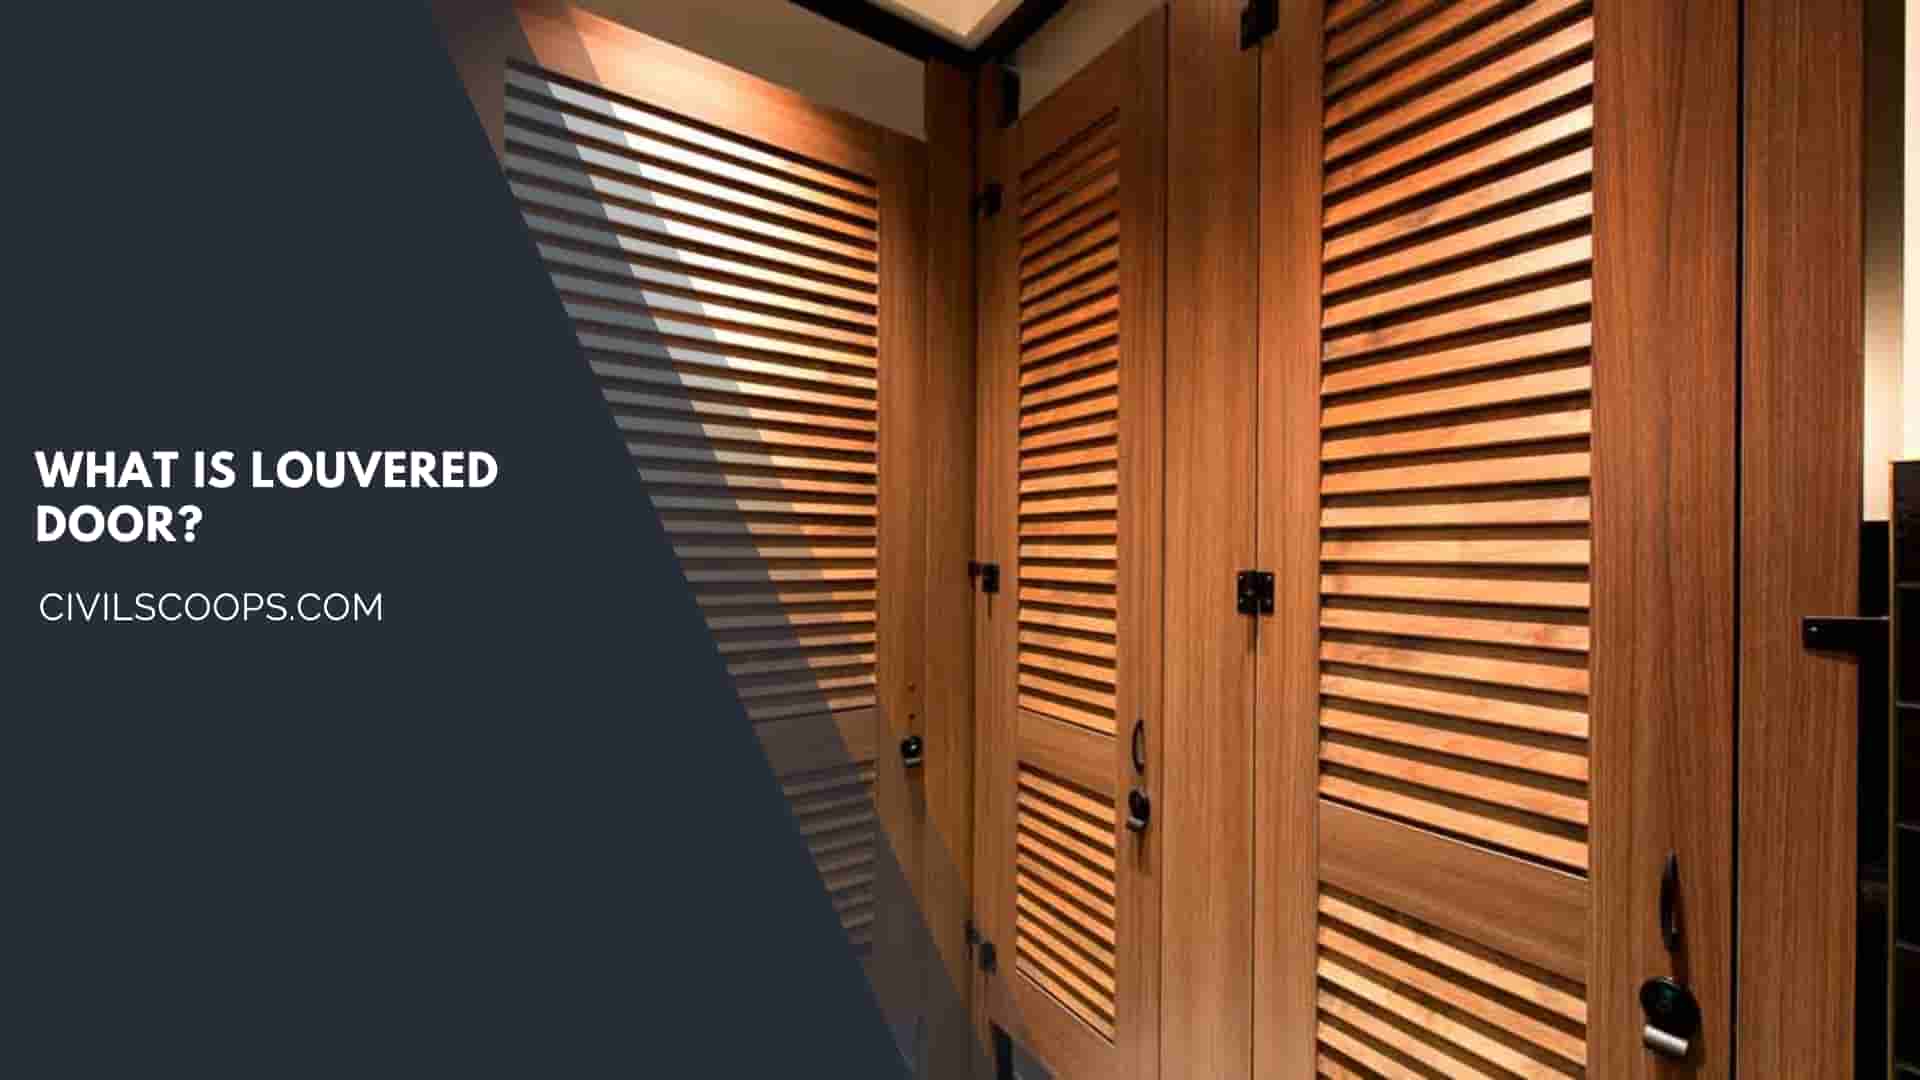 What is Louvered Door?